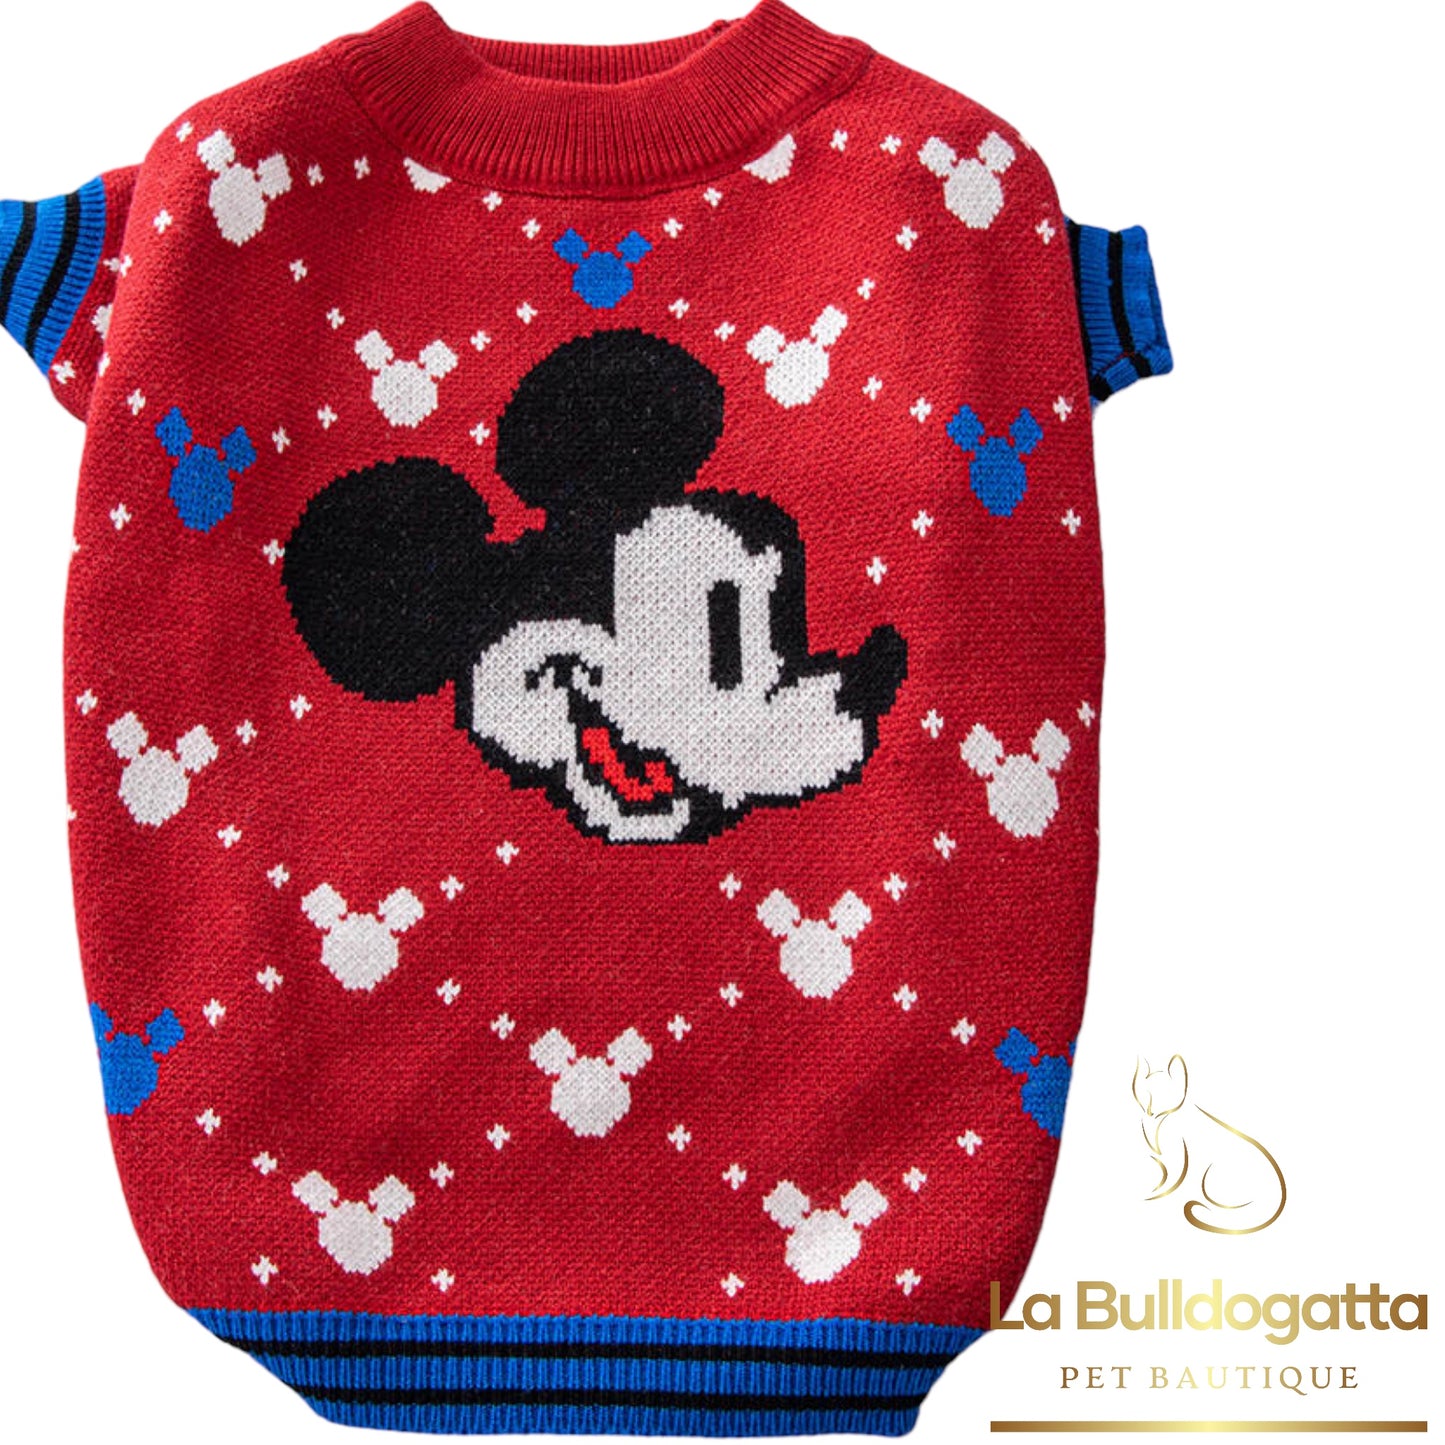 Red Mickey Mouse sweater